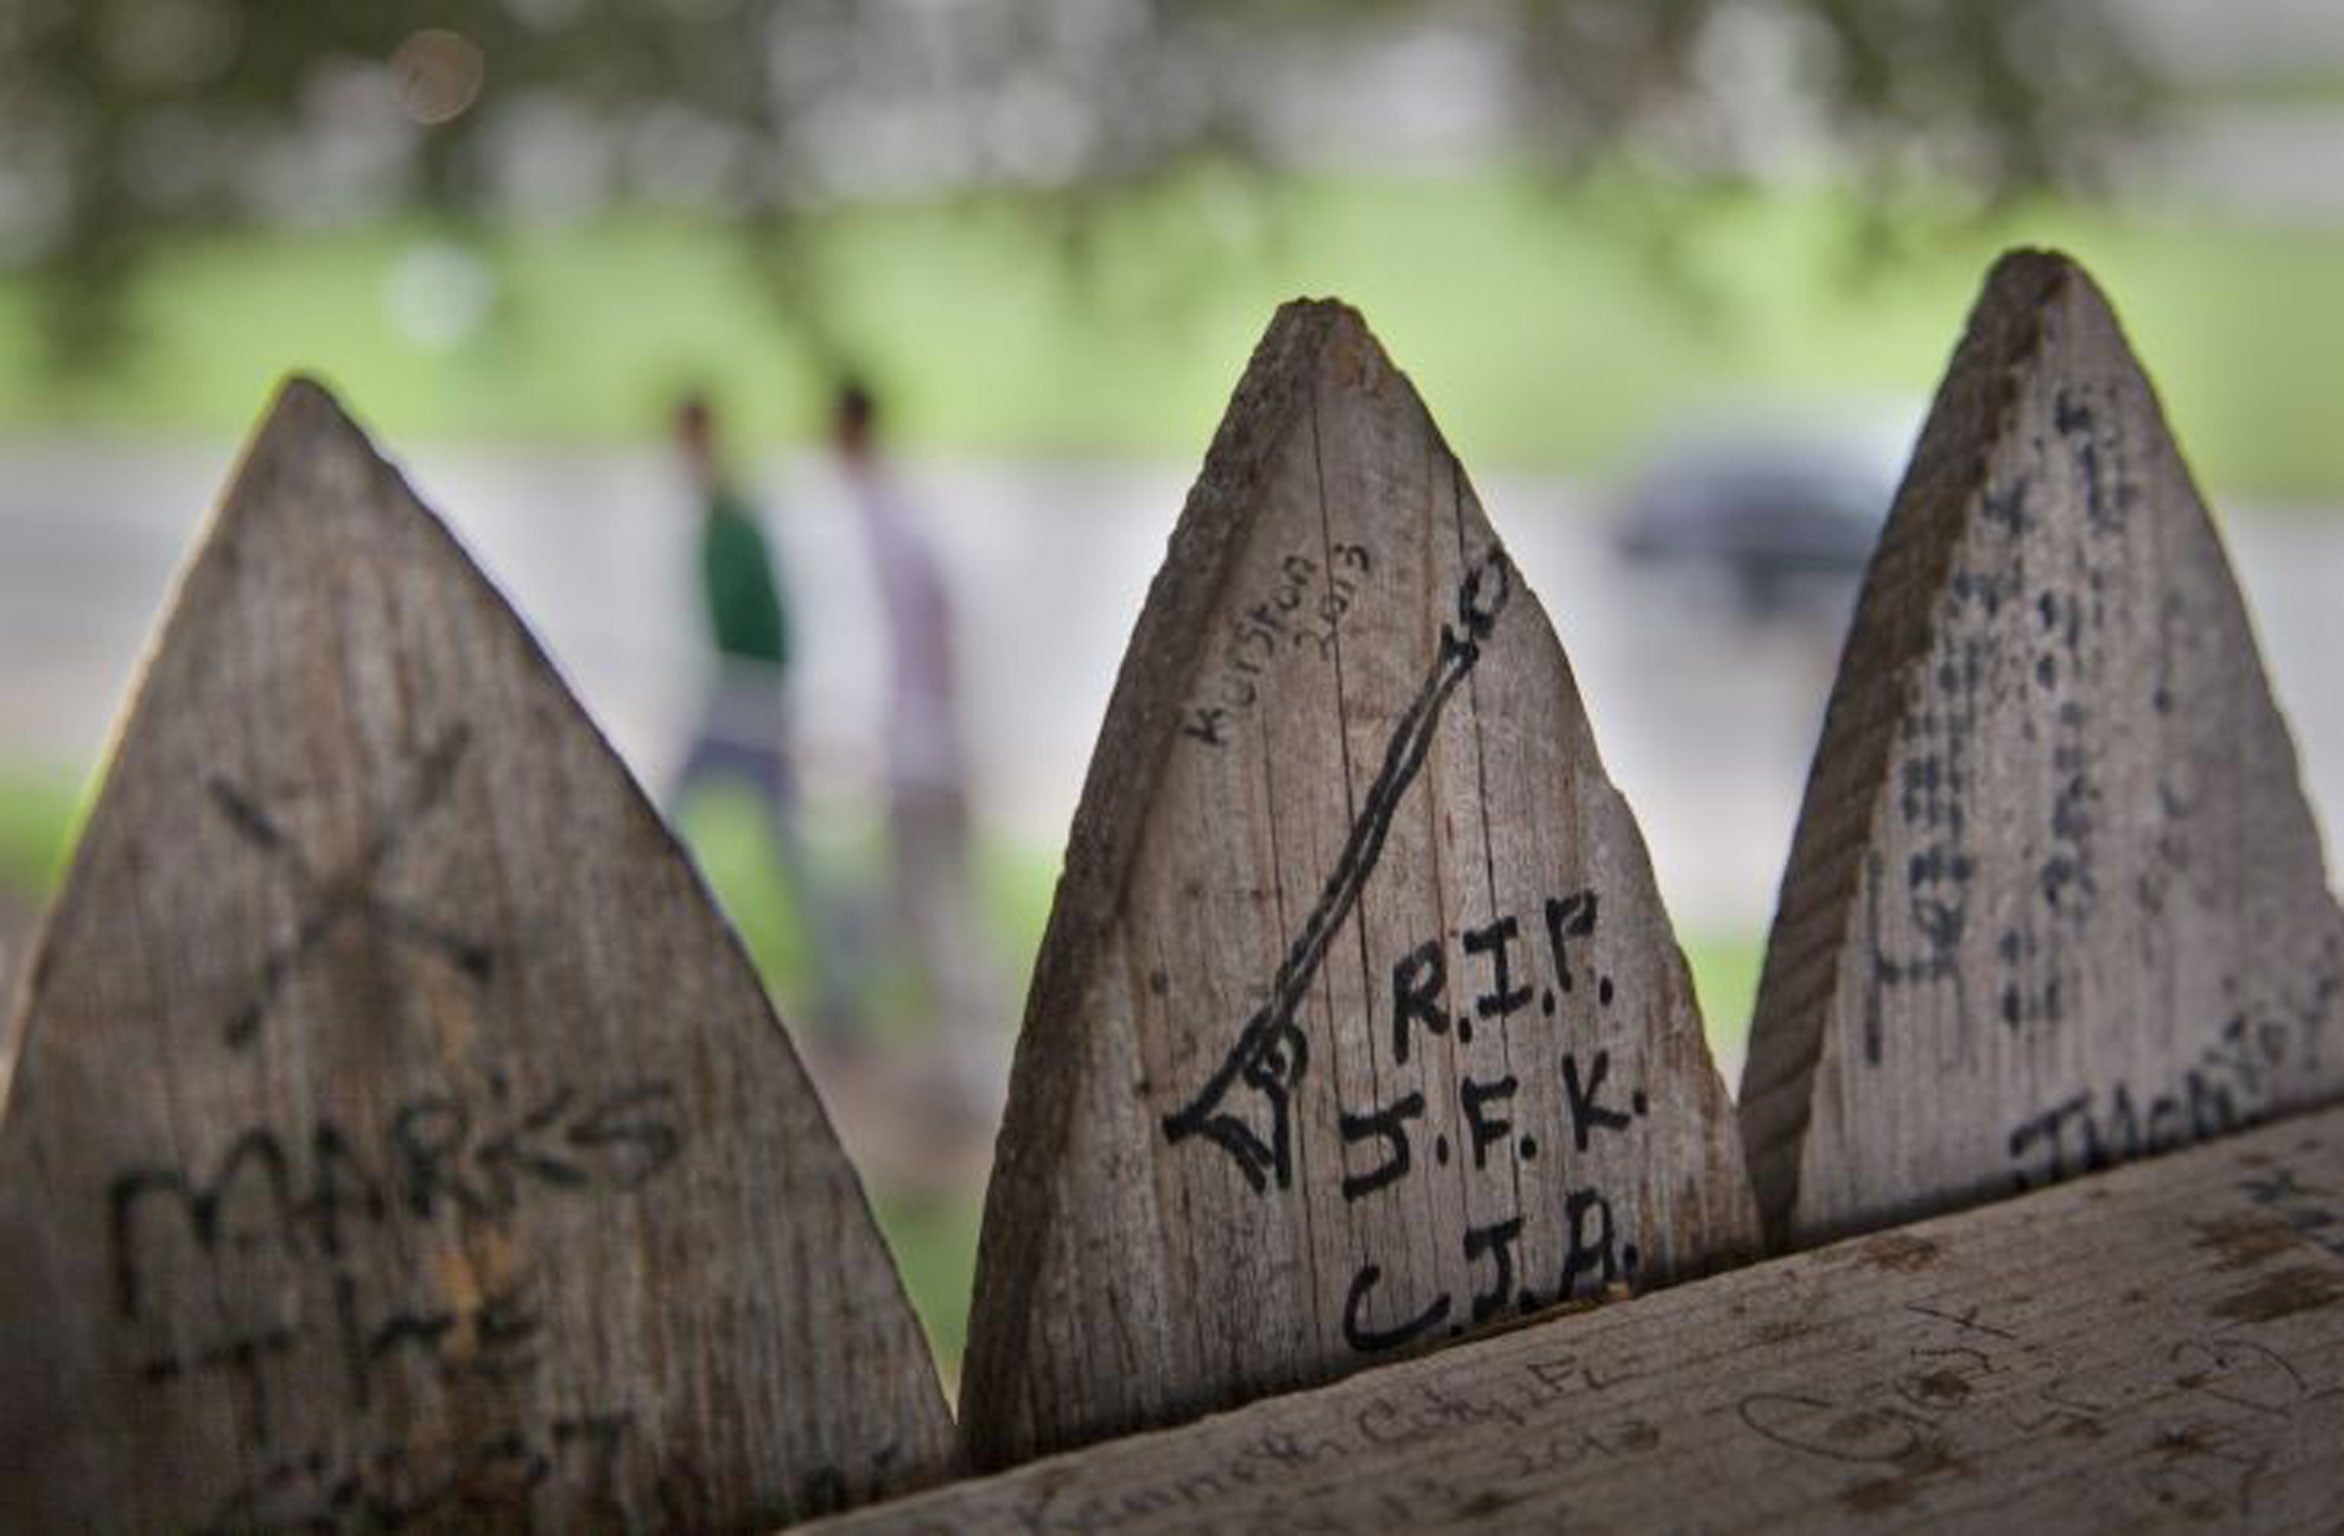 RIP JFK: the stockade fence that surrounds the Grassy Knoll is covered with messages and drawings left there by visitors